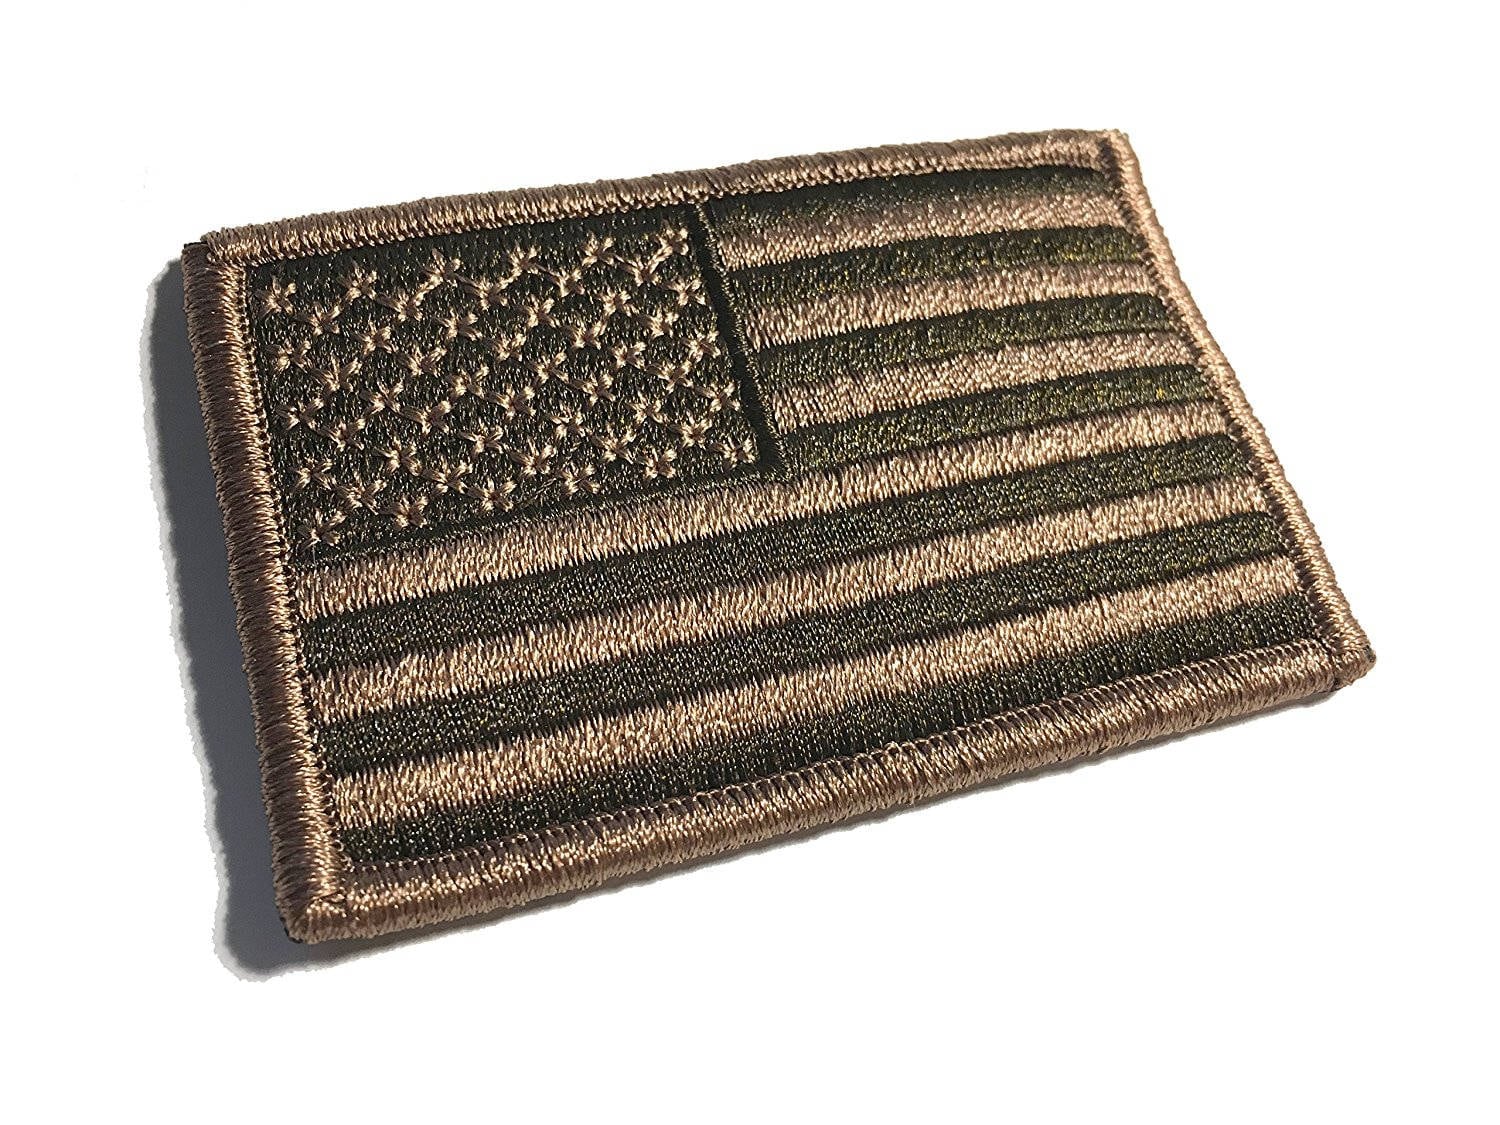 USA Flag Patch With Yellow Border 